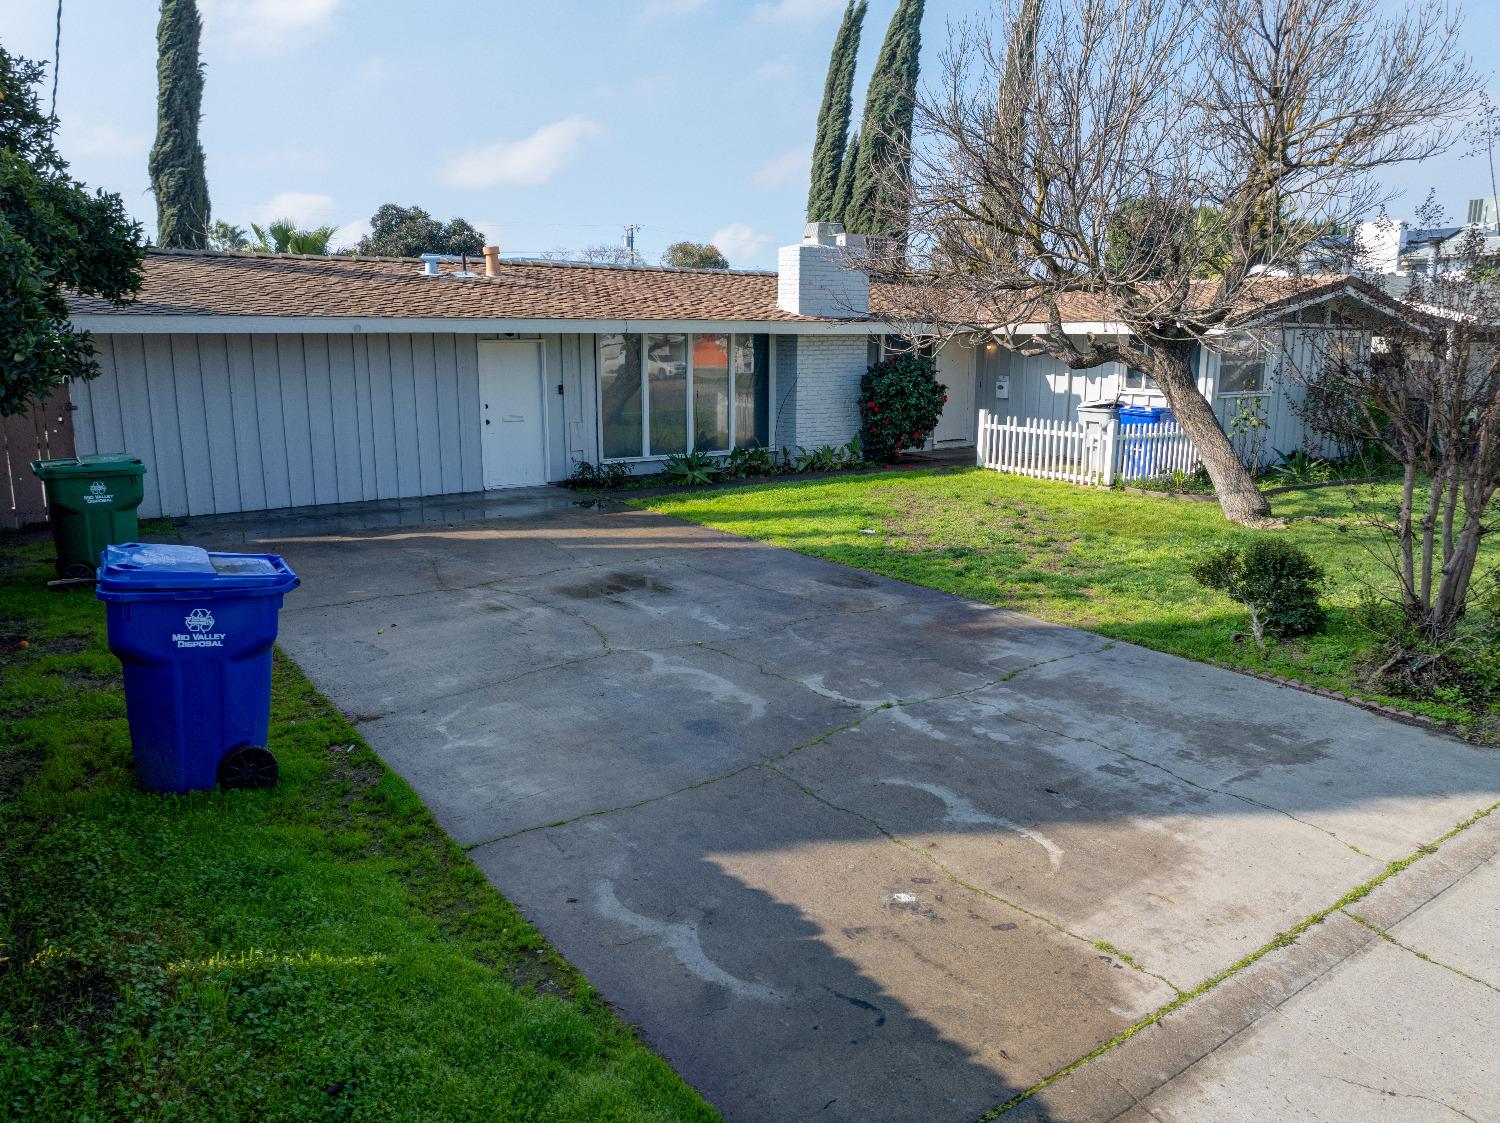 Photo of 216 Elm Ave in Atwater, CA